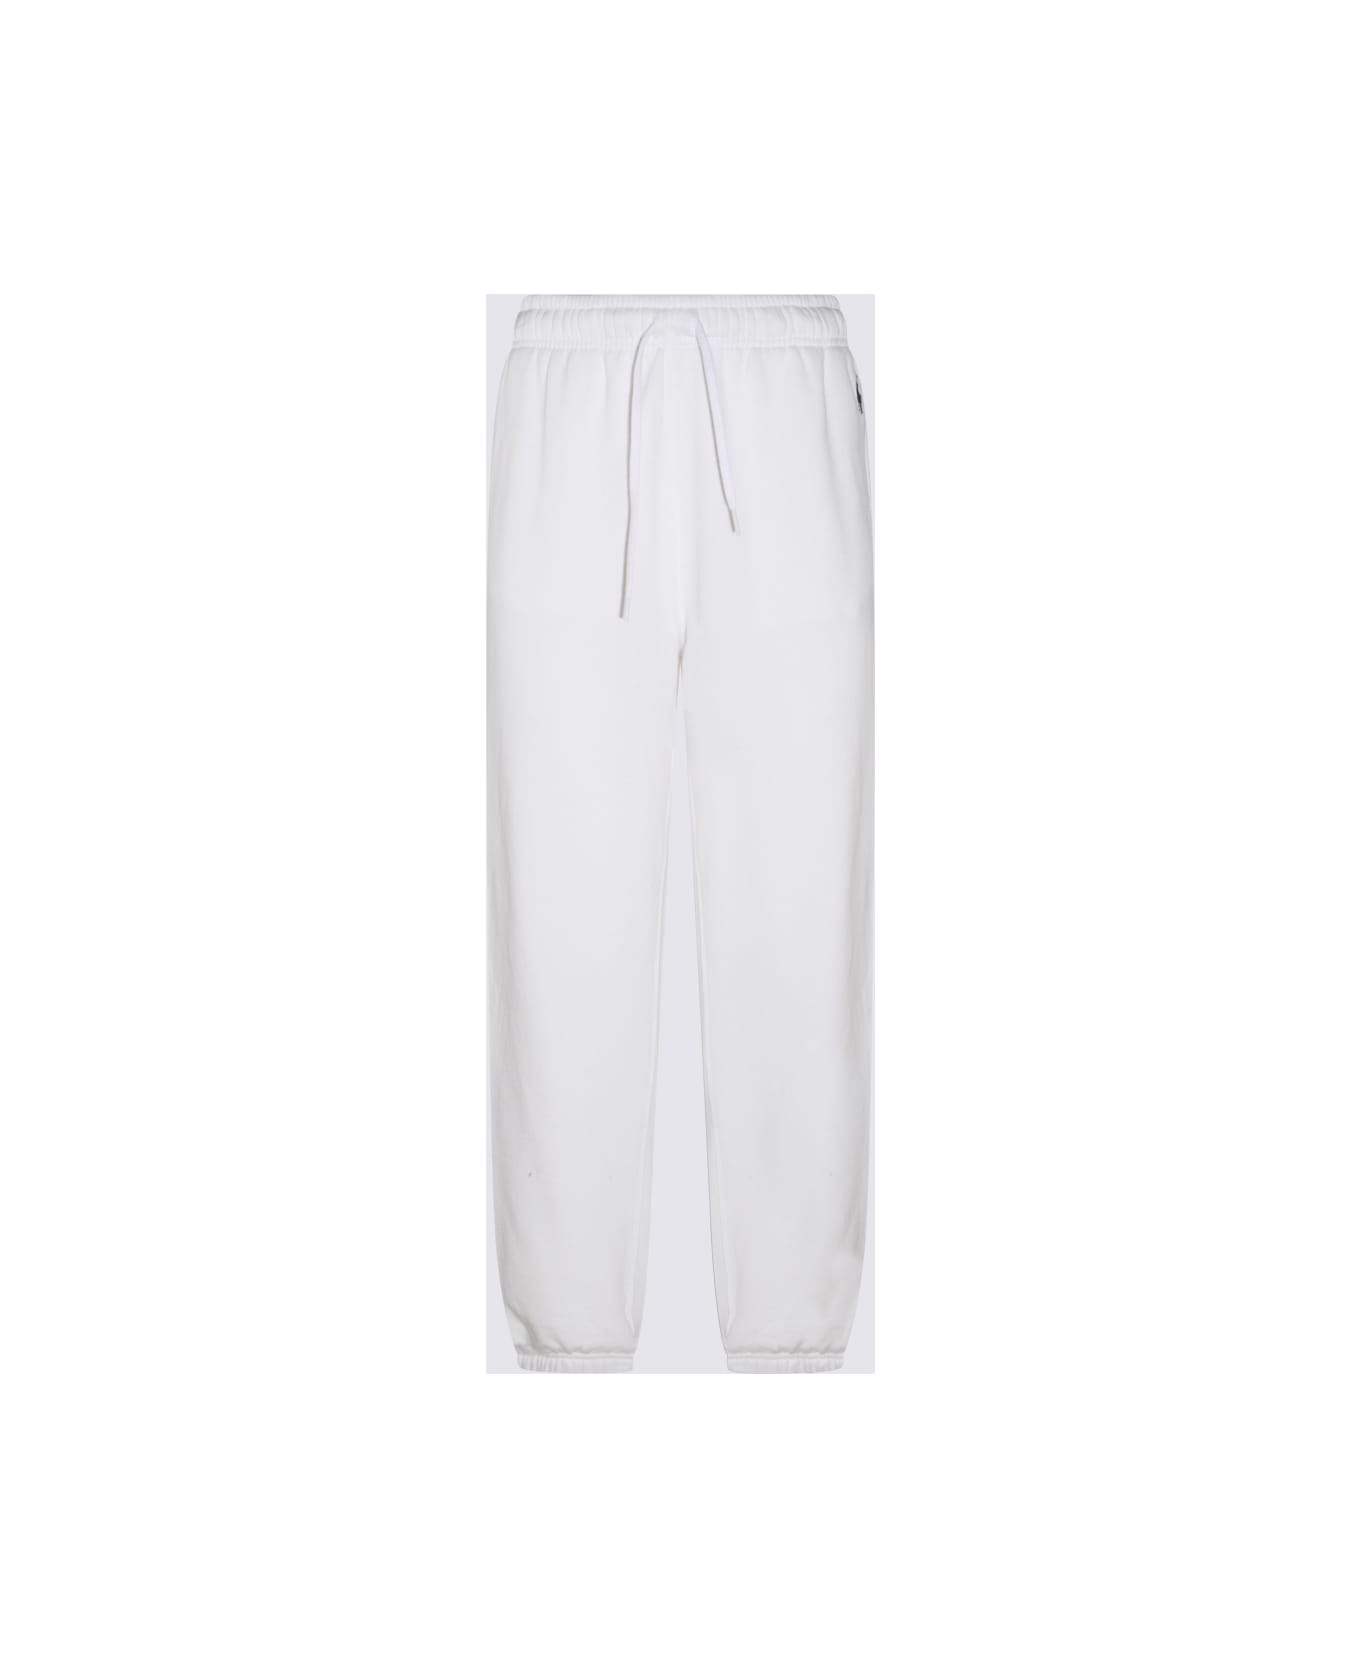 Polo Ralph Lauren White And Blue Cotton Blend Track Pants - White